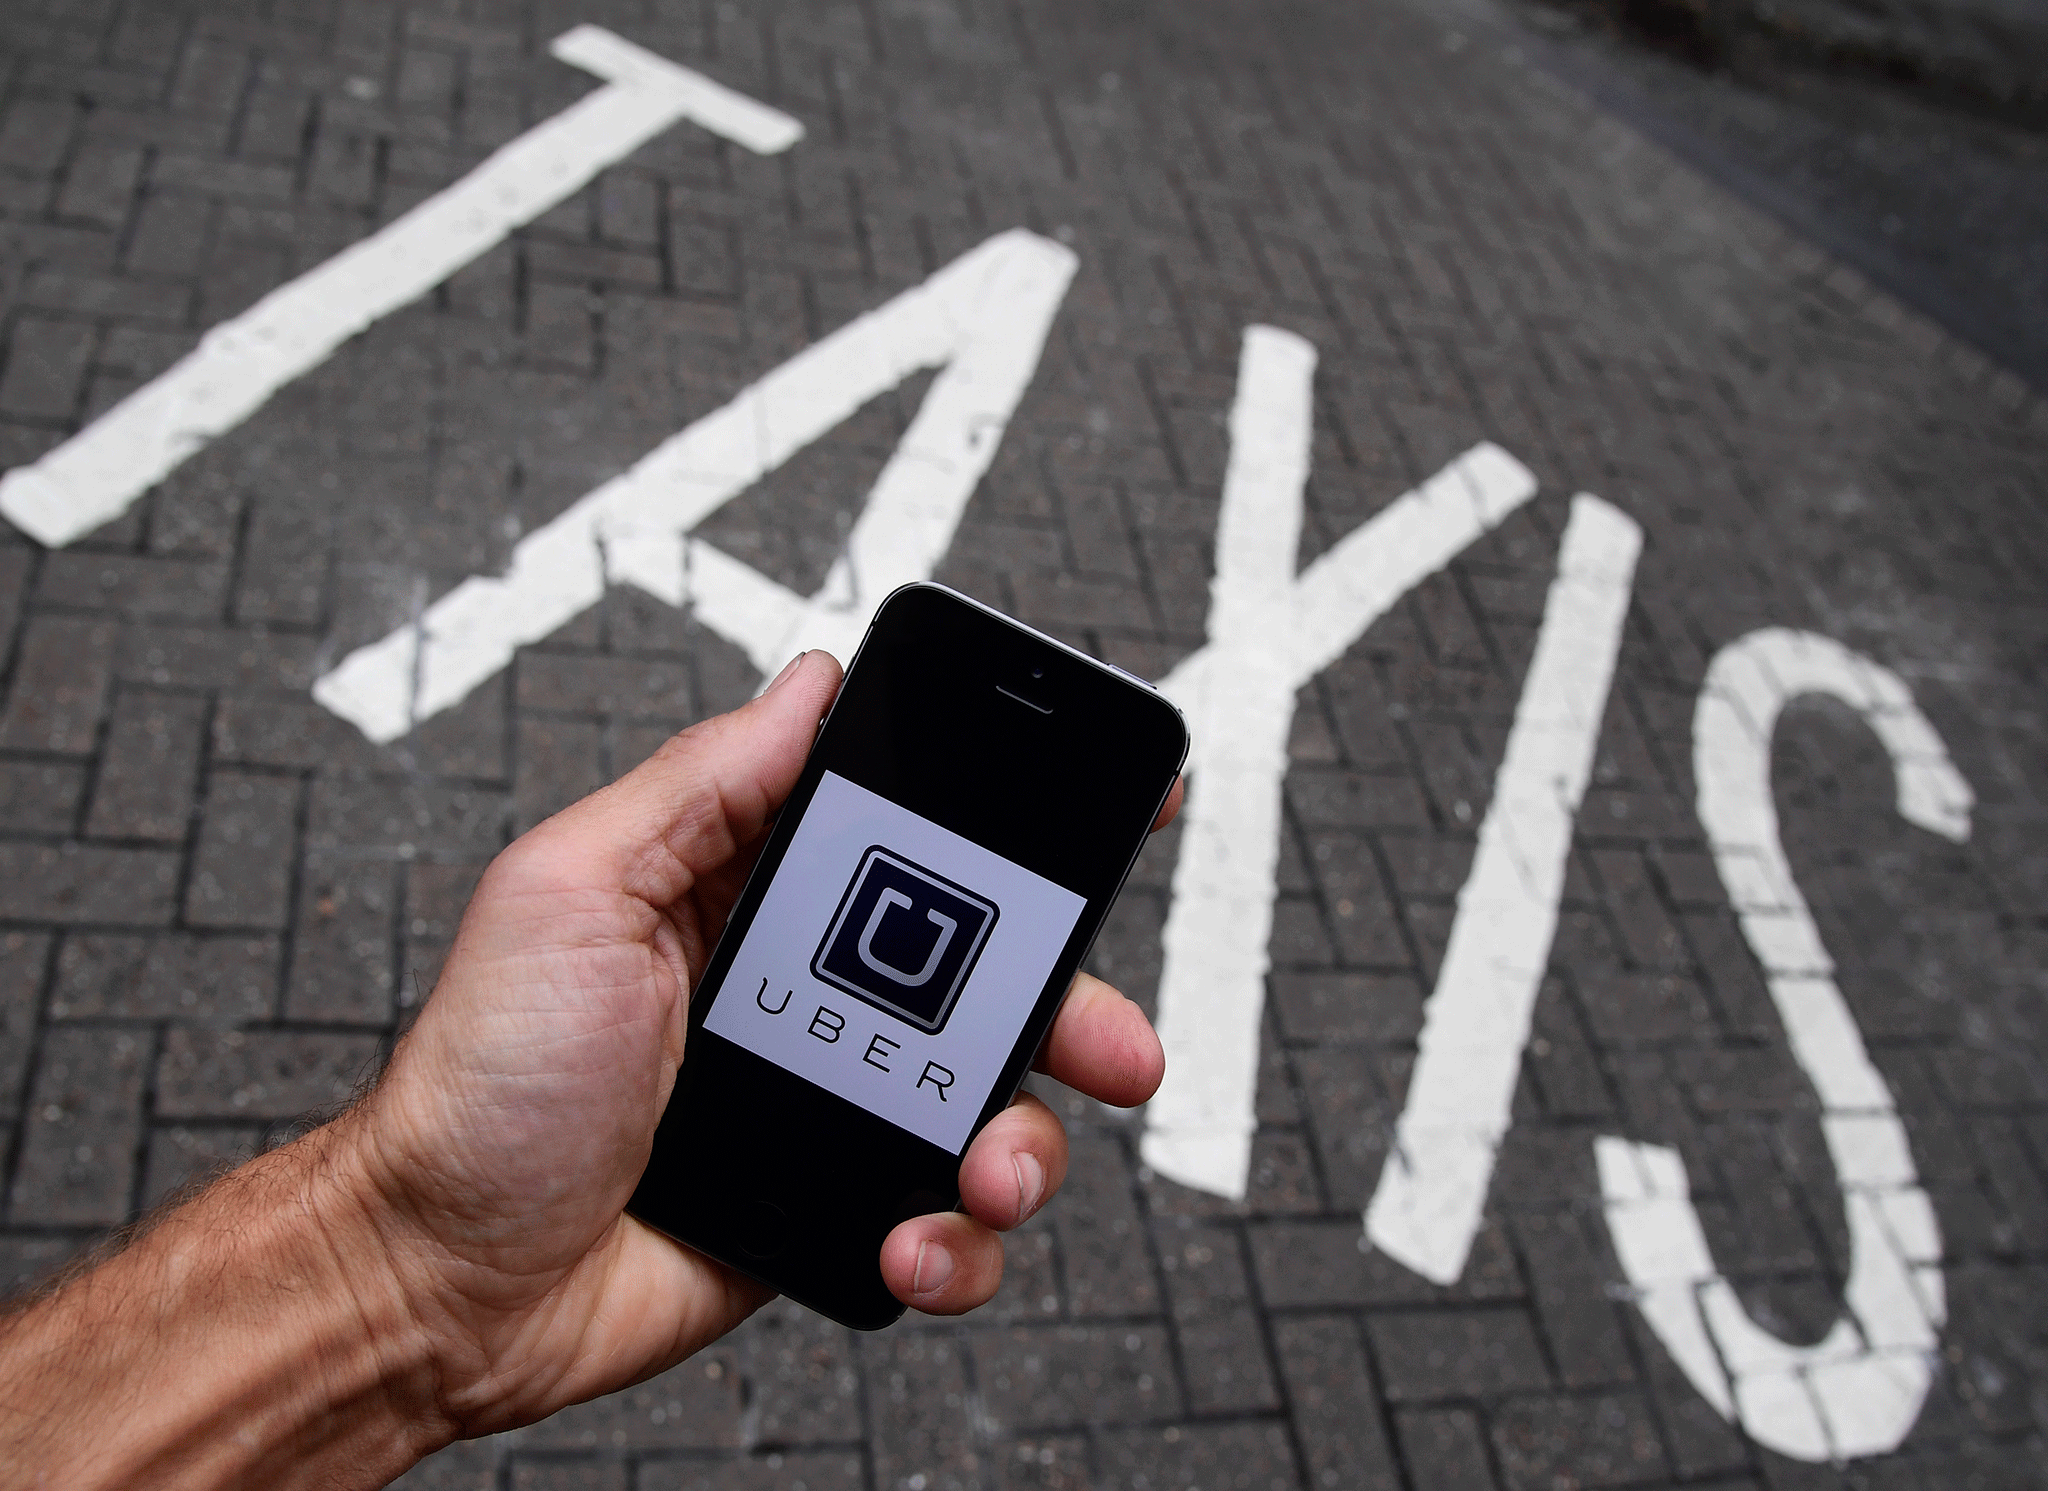 ?Social media campaigns have targeted Uber, urging users to delete their accounts and choose rival taxi firms such as Lyft